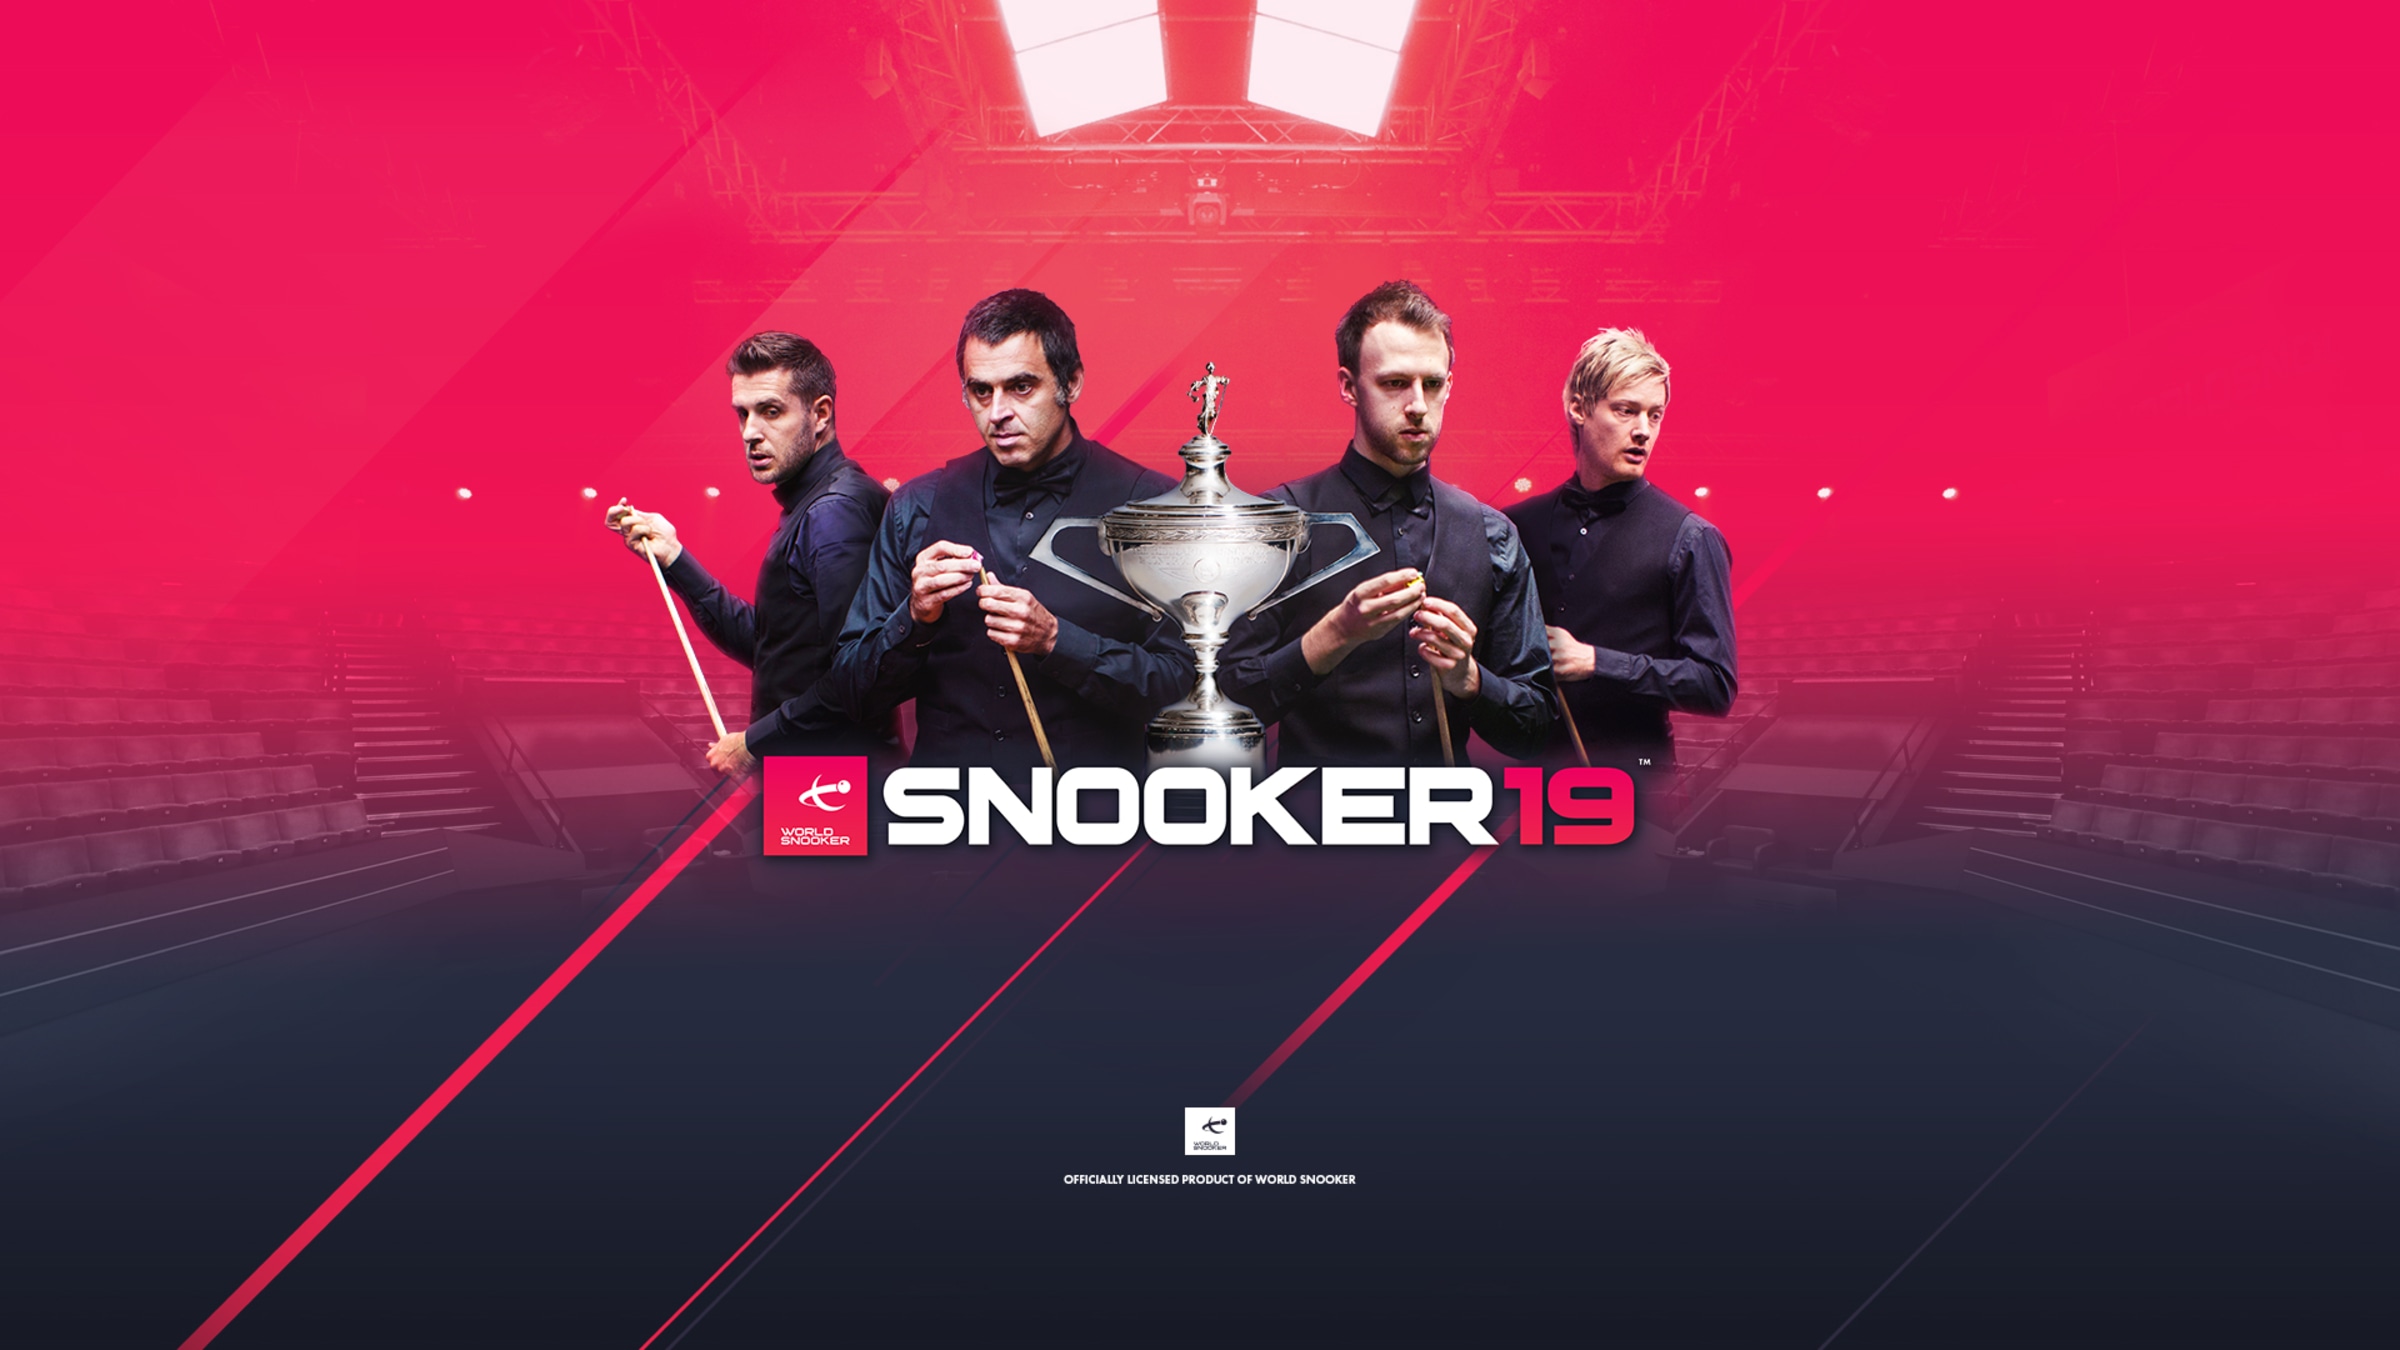 Snooker 19 for Nintendo Switch